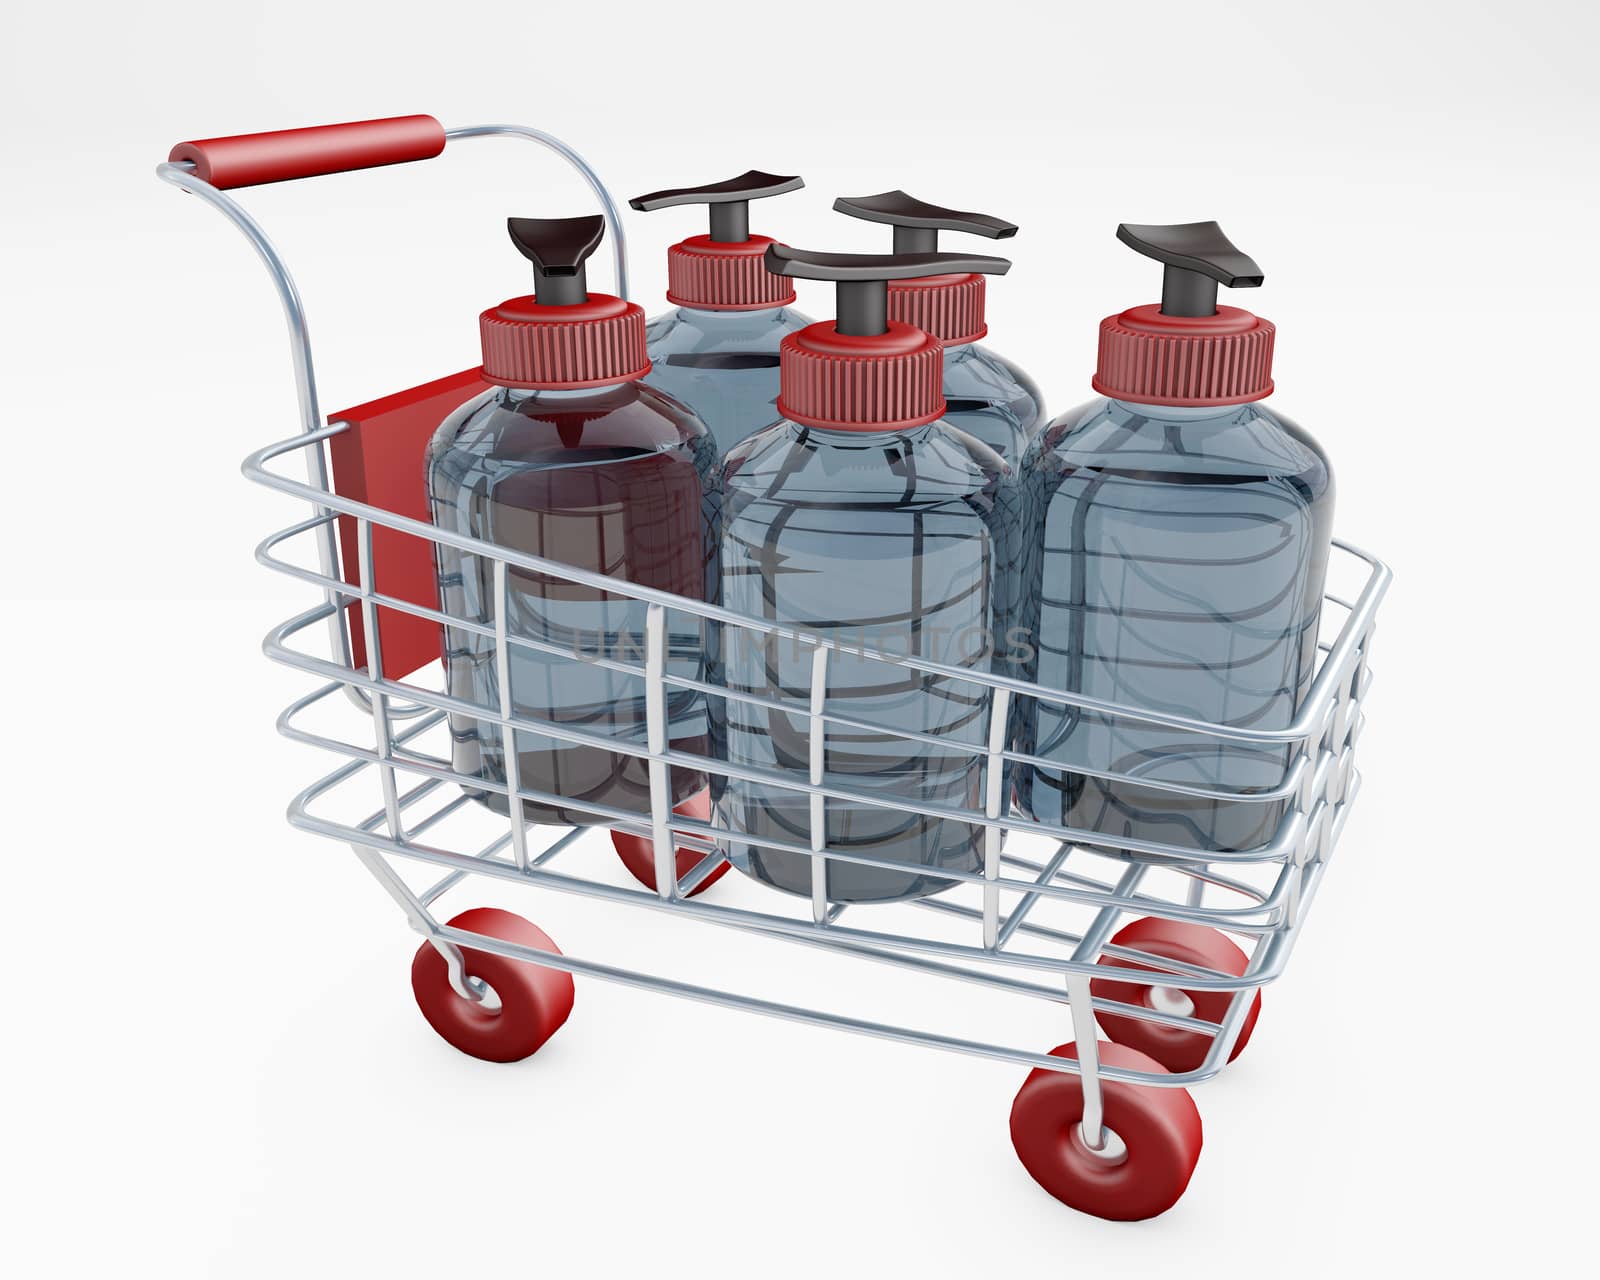 Shopping cart full of disinfectant 3d rendering by F1b0nacci